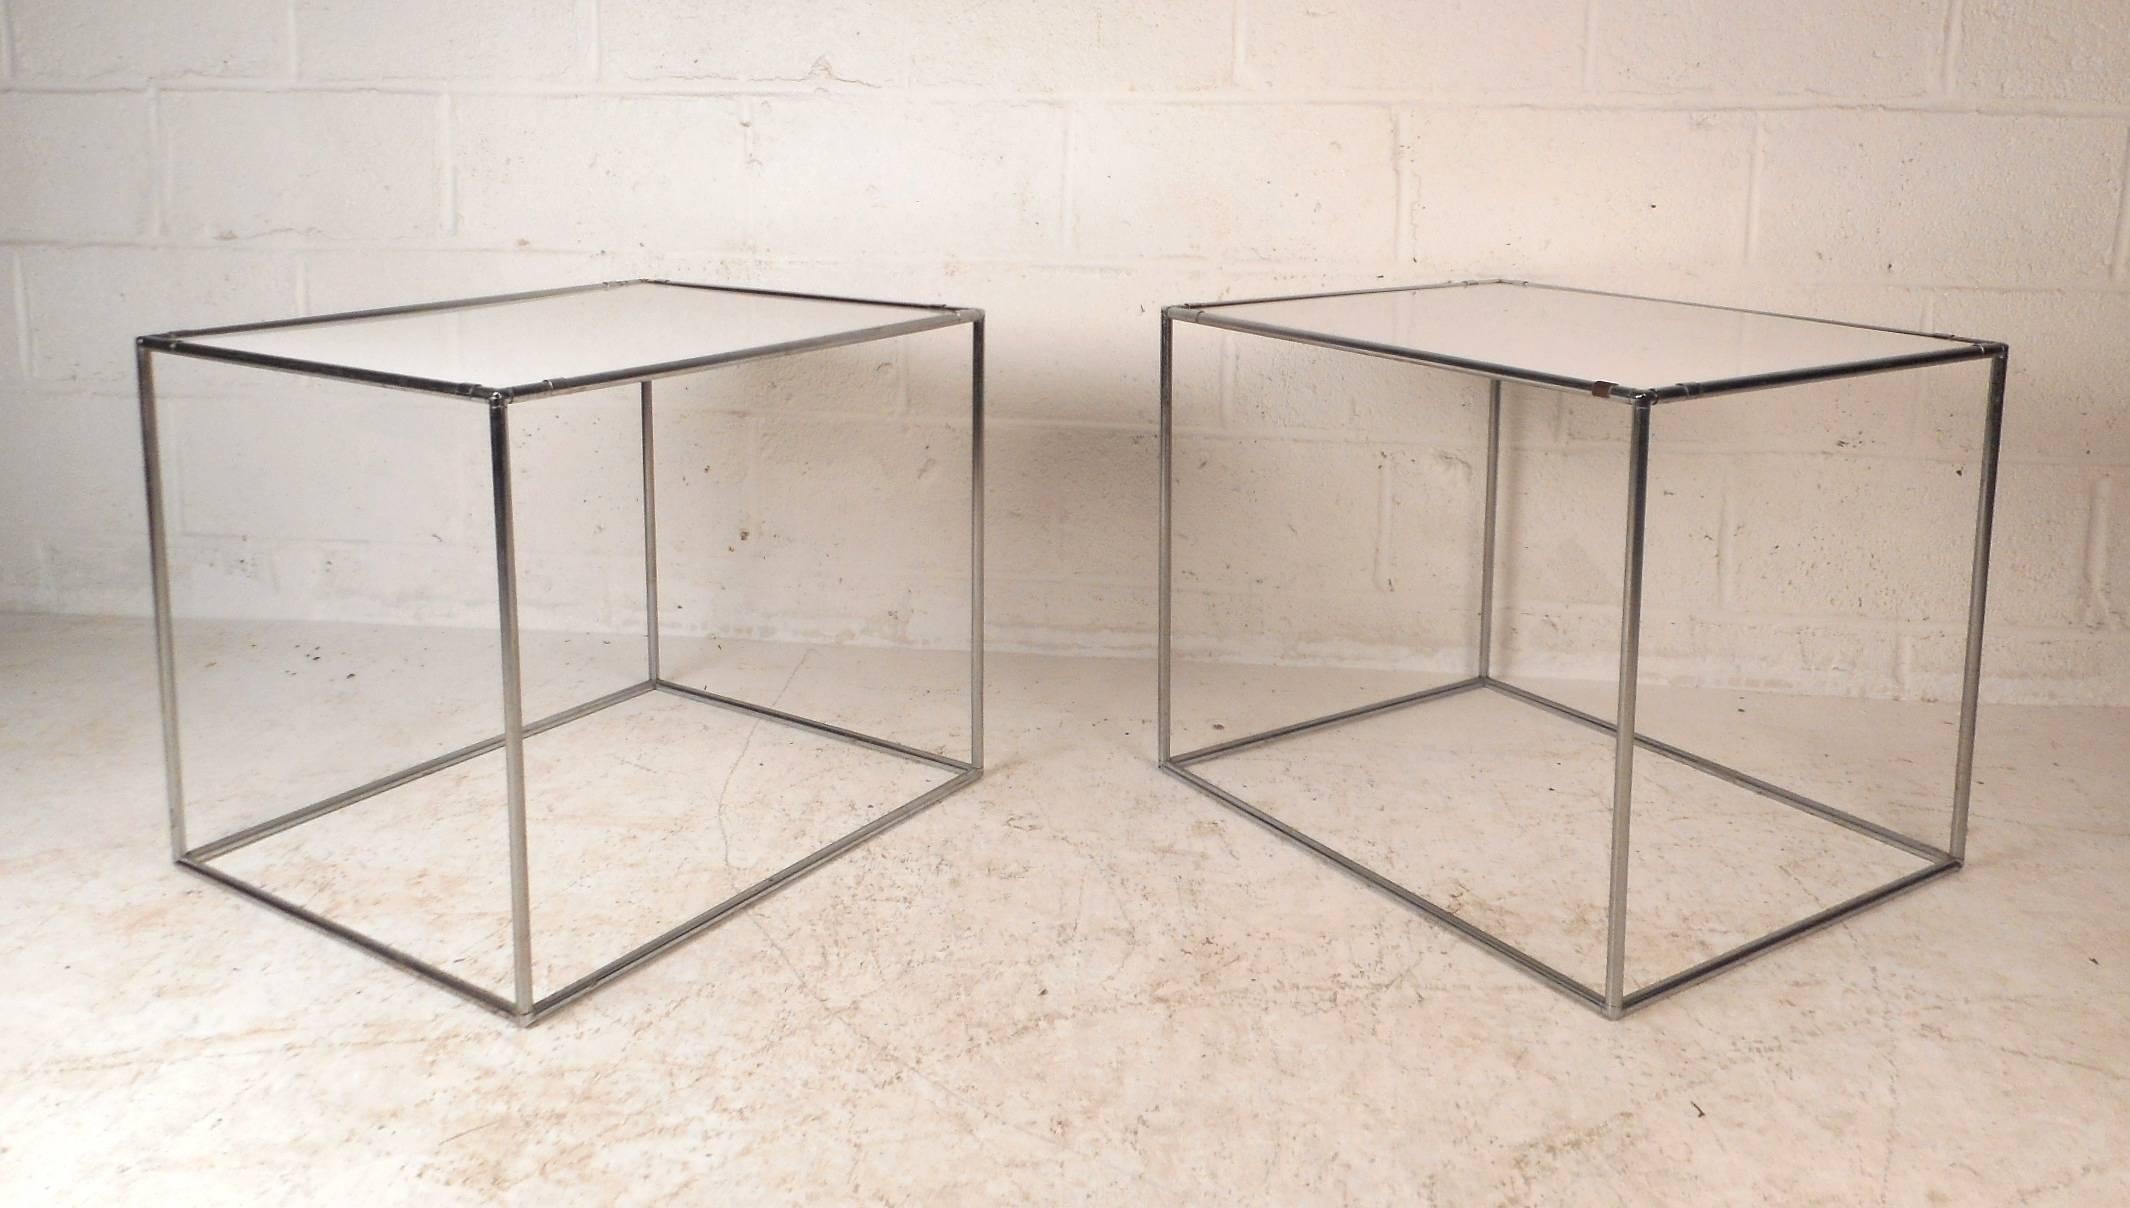 This beautiful pair of vintage modern end tables feature a unique chrome rod frame. Sleek and sturdy design with a white tabletop. This unusual midcentury pair makes the perfect addition to any modern interior. Please confirm item location (NY or